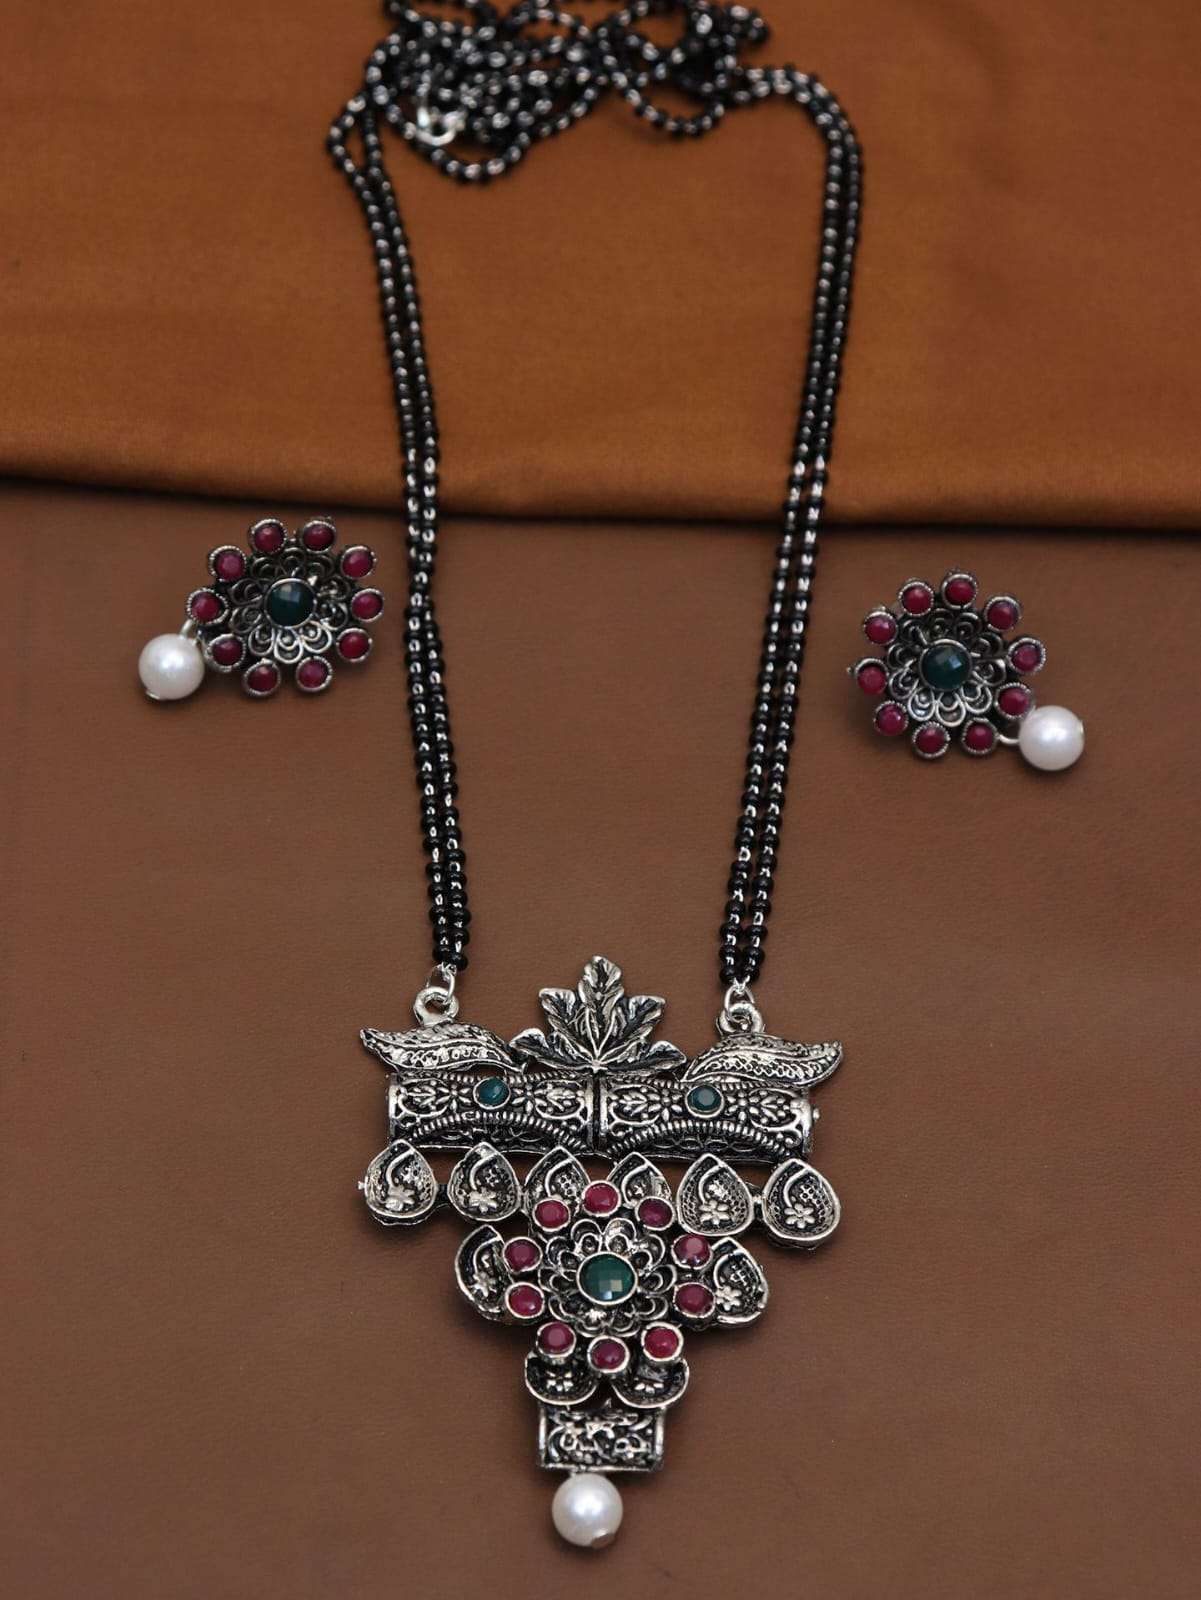 M-1165 SERIES BY FASHID WHOLESALE 1165 TO 1168 SERIES TRADITIONAL IMITATION JEWELLERY FOR INDIAN ATTIRE AT EXCLUSIVE RANGE.